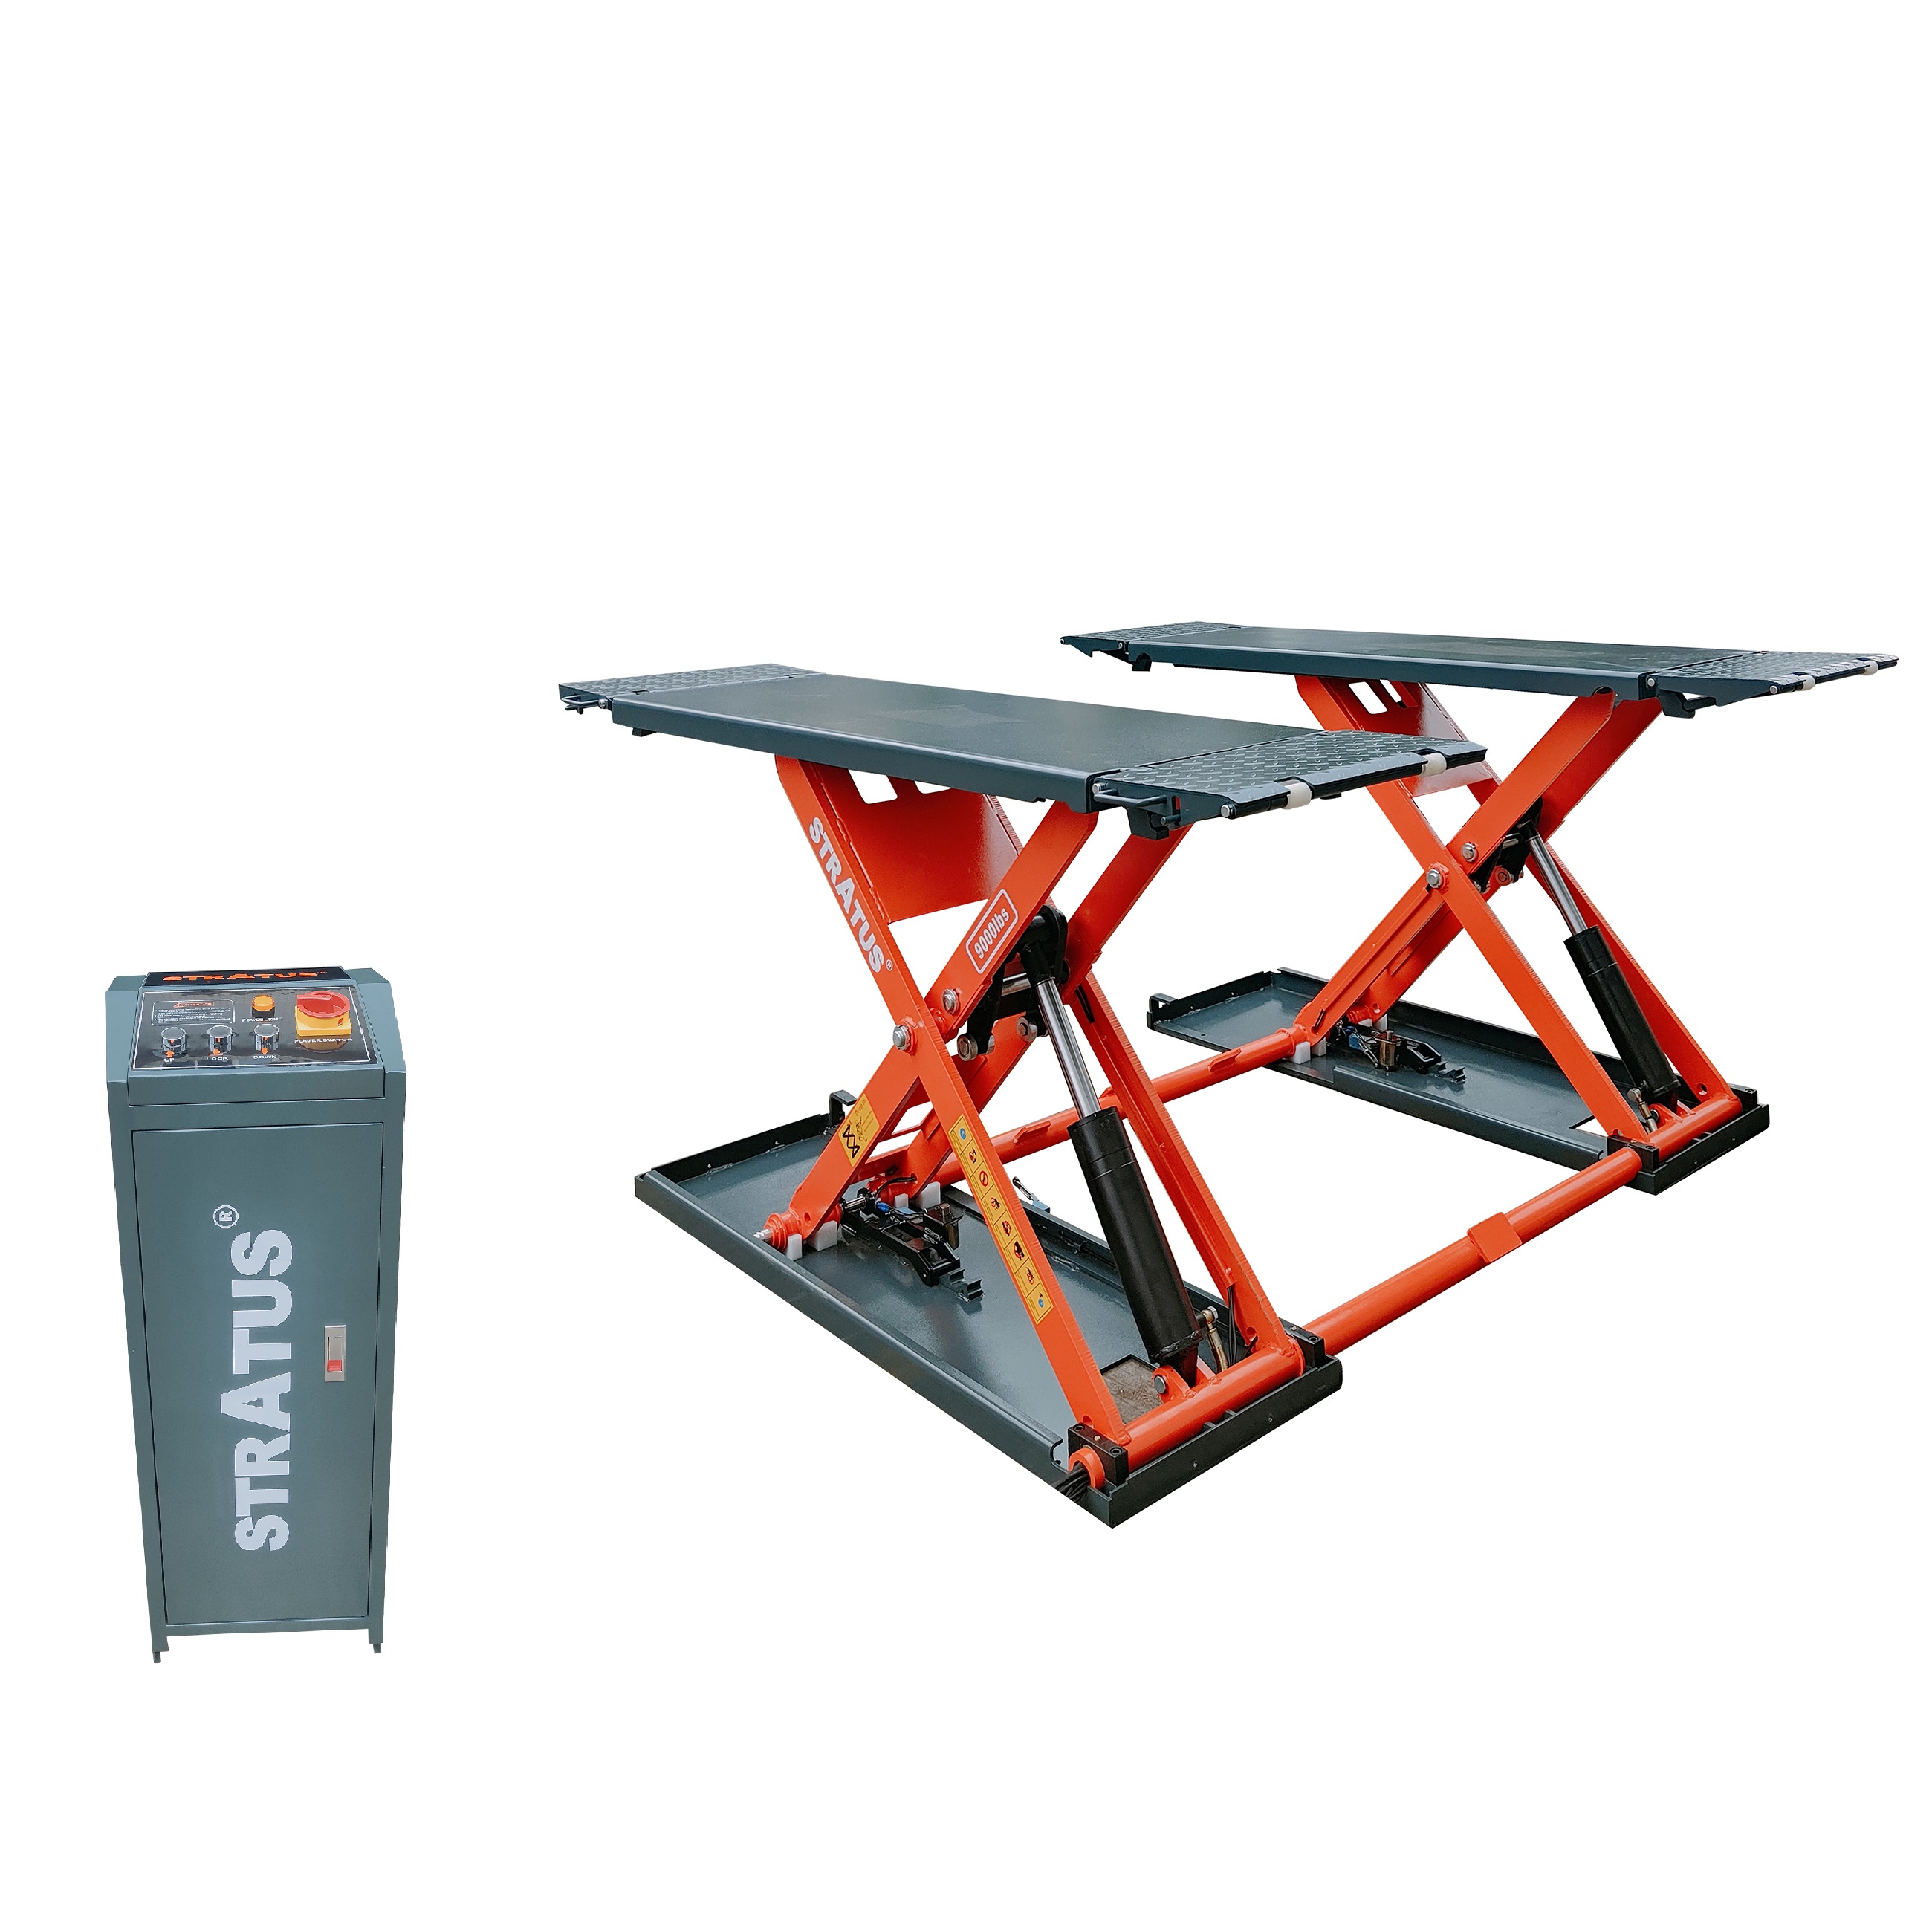 his mid rise scissor lift is specifically engineered with the user in mind. It's extra wide and extra tall, standing proudly at 47 1/4", ensuring you can work on a massive range of vehicles with room to spare. Its 9000 lbs capacity makes lifting heavy vehicles a breeze, and the electric safety lock release guarantees your work is carried out securely. Experience a new approach to car lifting with this top-of-the-line model.